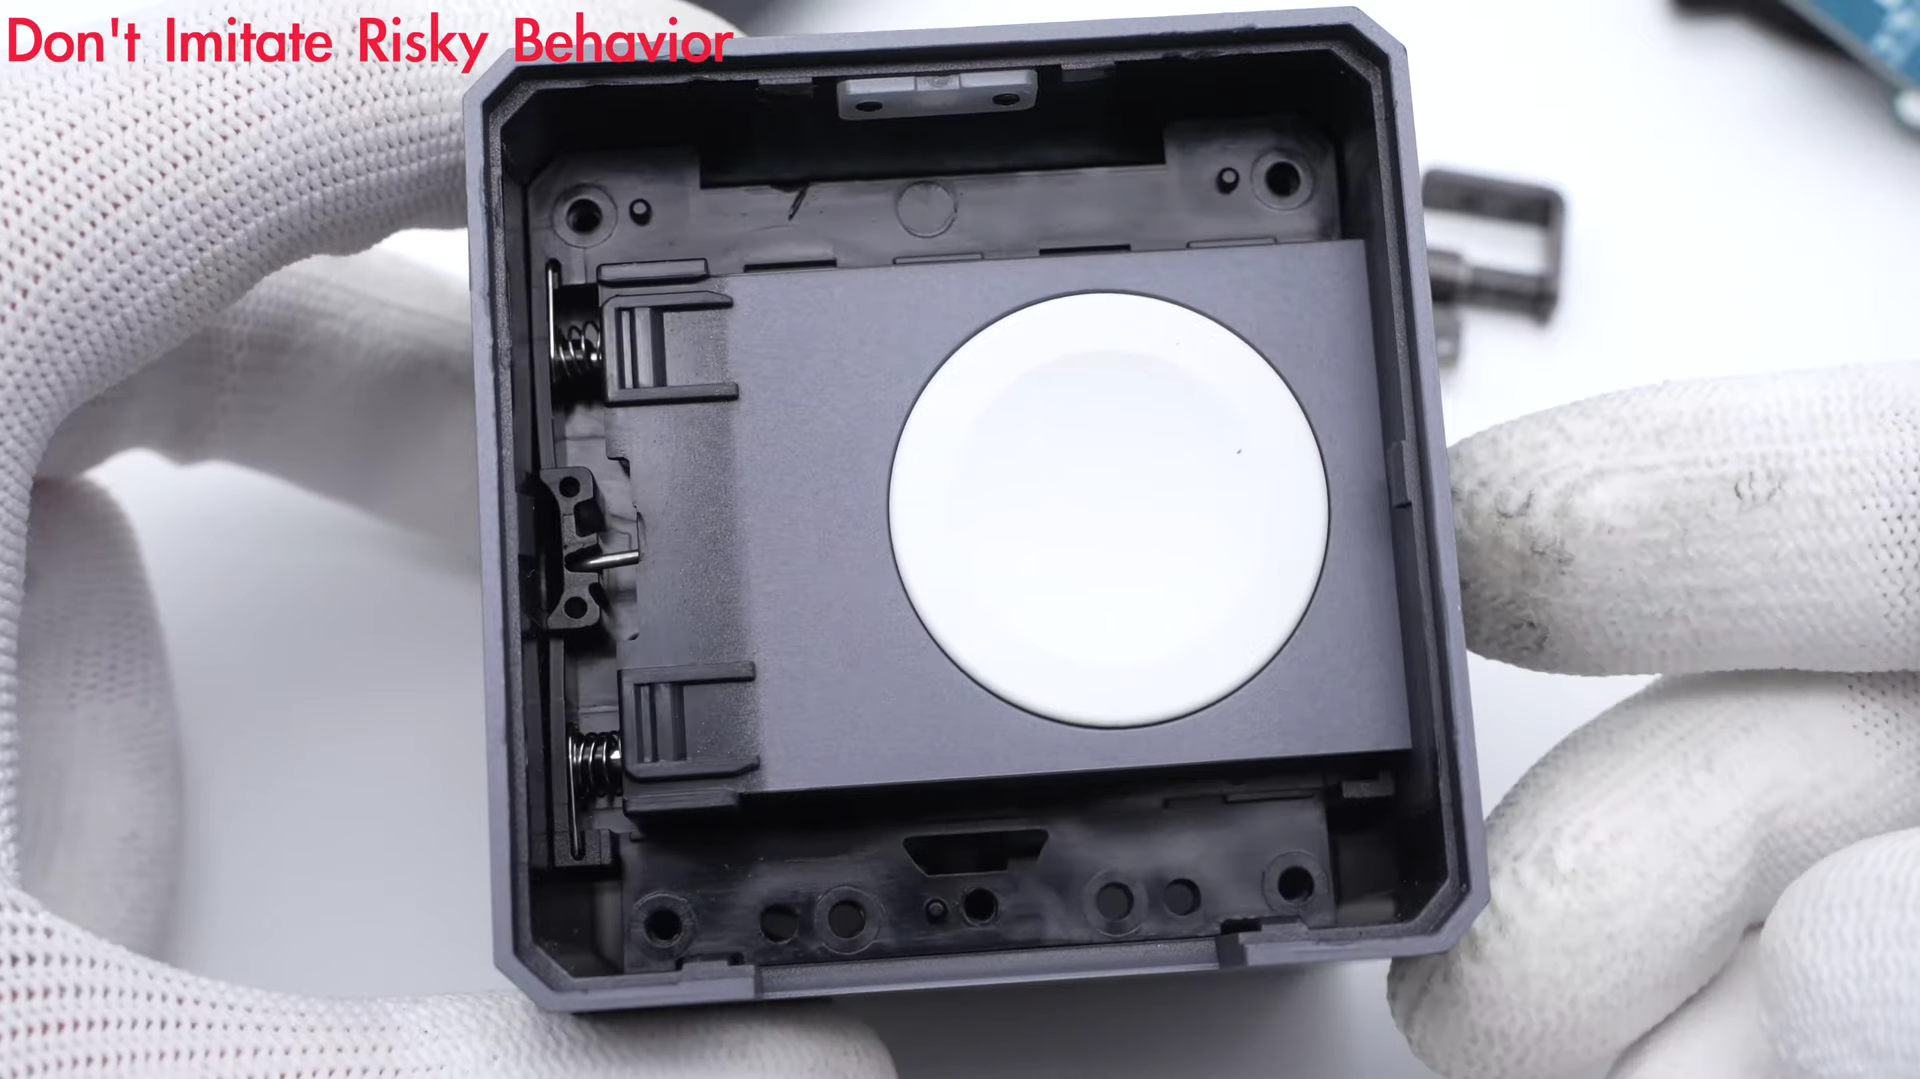 Teardown of Anker 3-in-1 MagSafe Charging Cube (Y1811)-Chargerlab